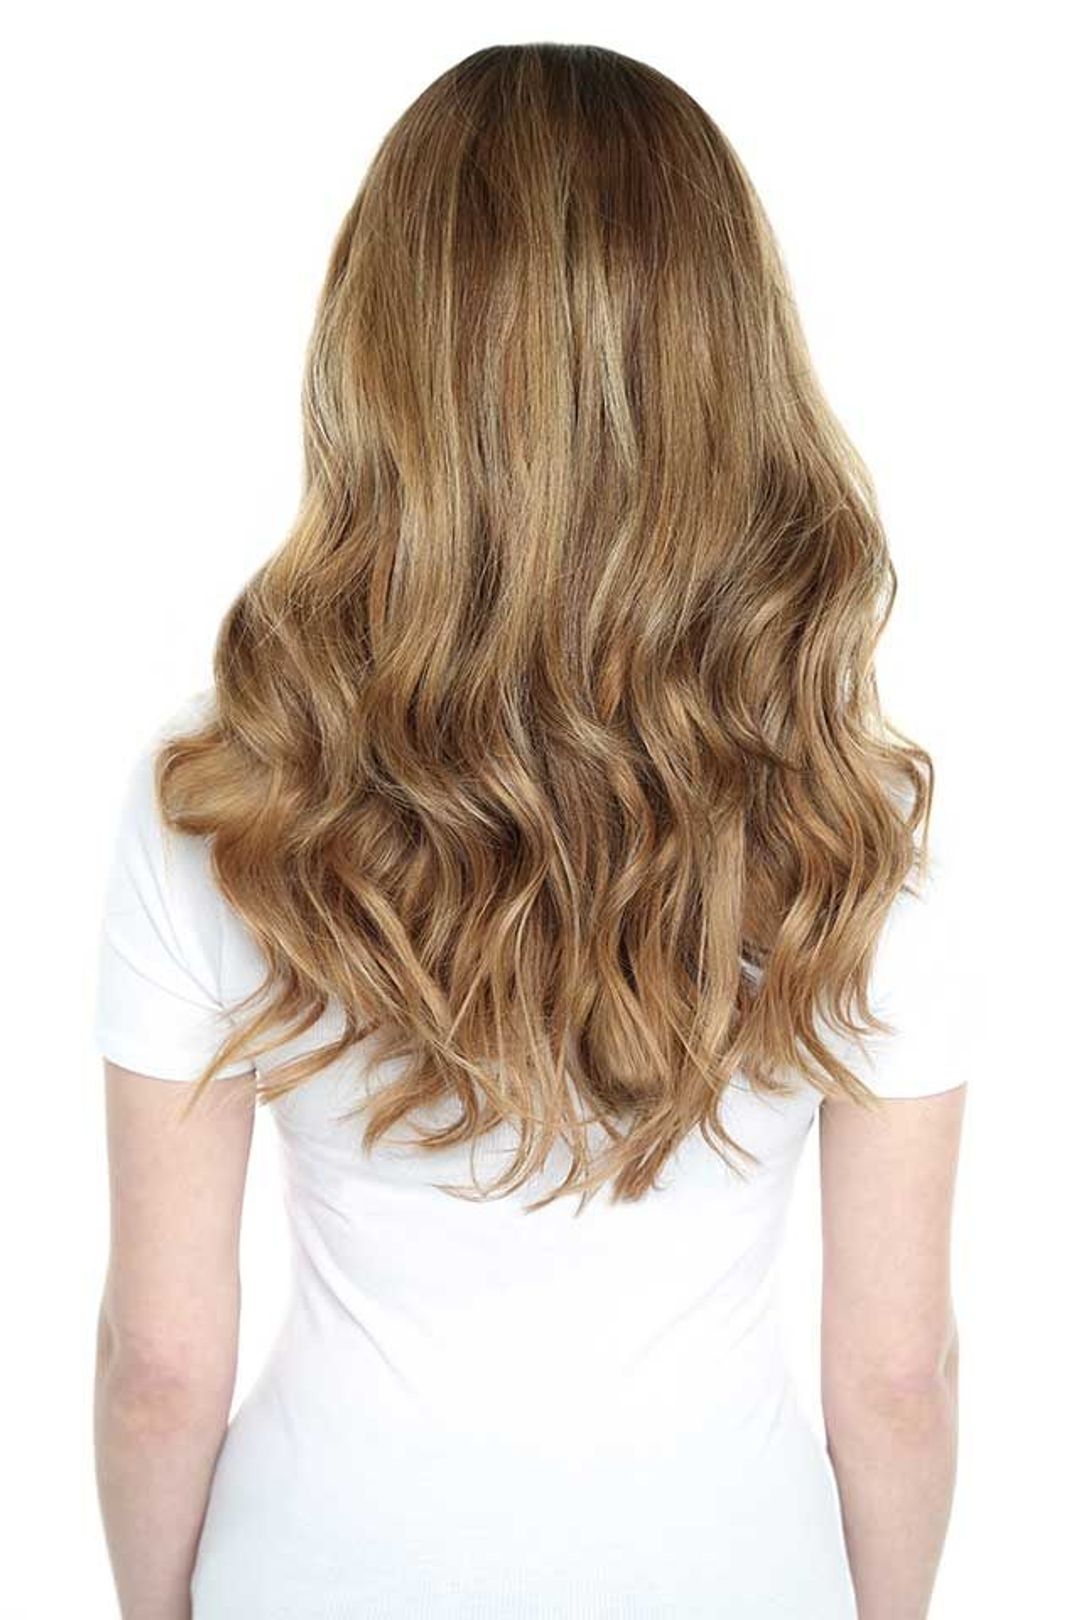 Beauty Works Celebrity Choice Weft Hair Extensions - La Blonde,16"